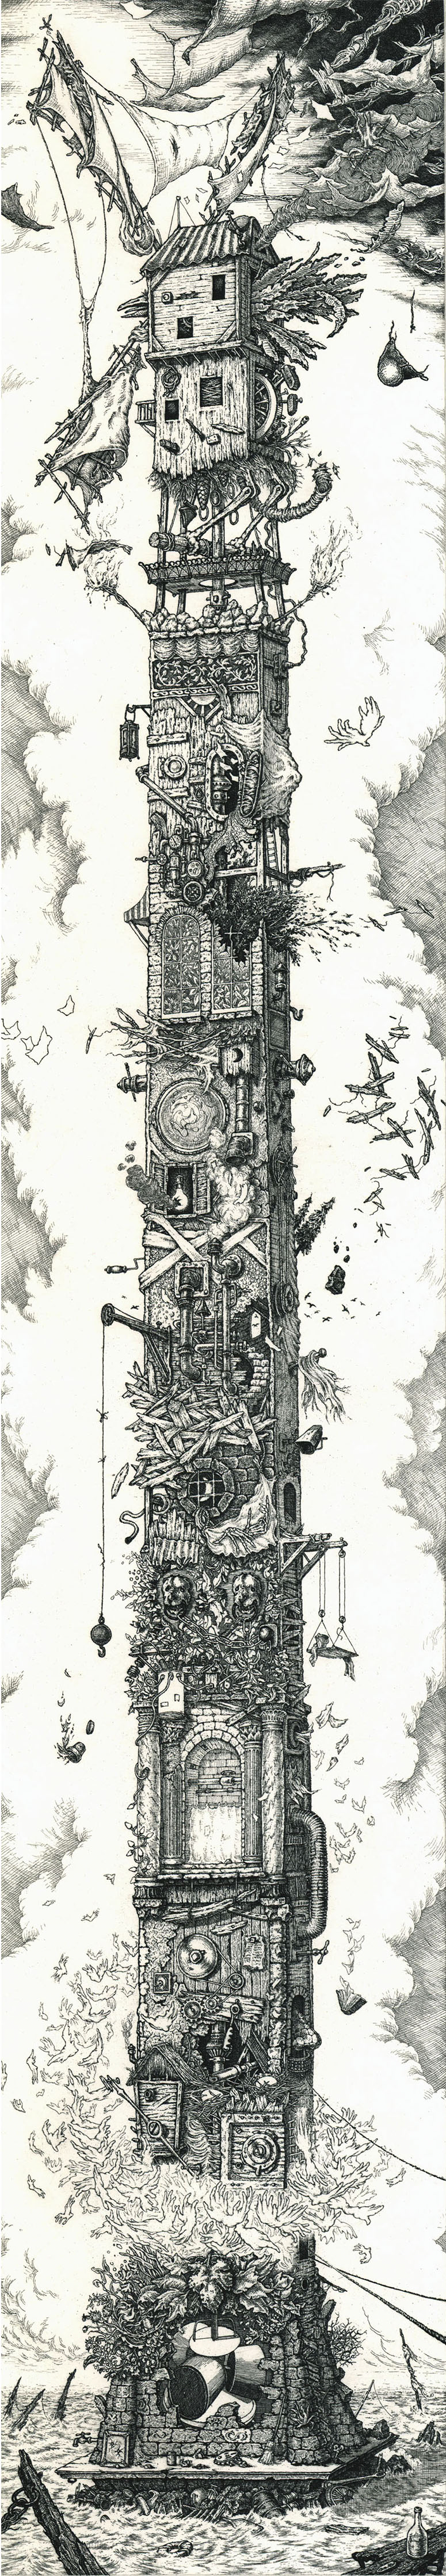 Obeliscolychny, 2013, hard ground etching27.75”x 5”Courtesy of the artist